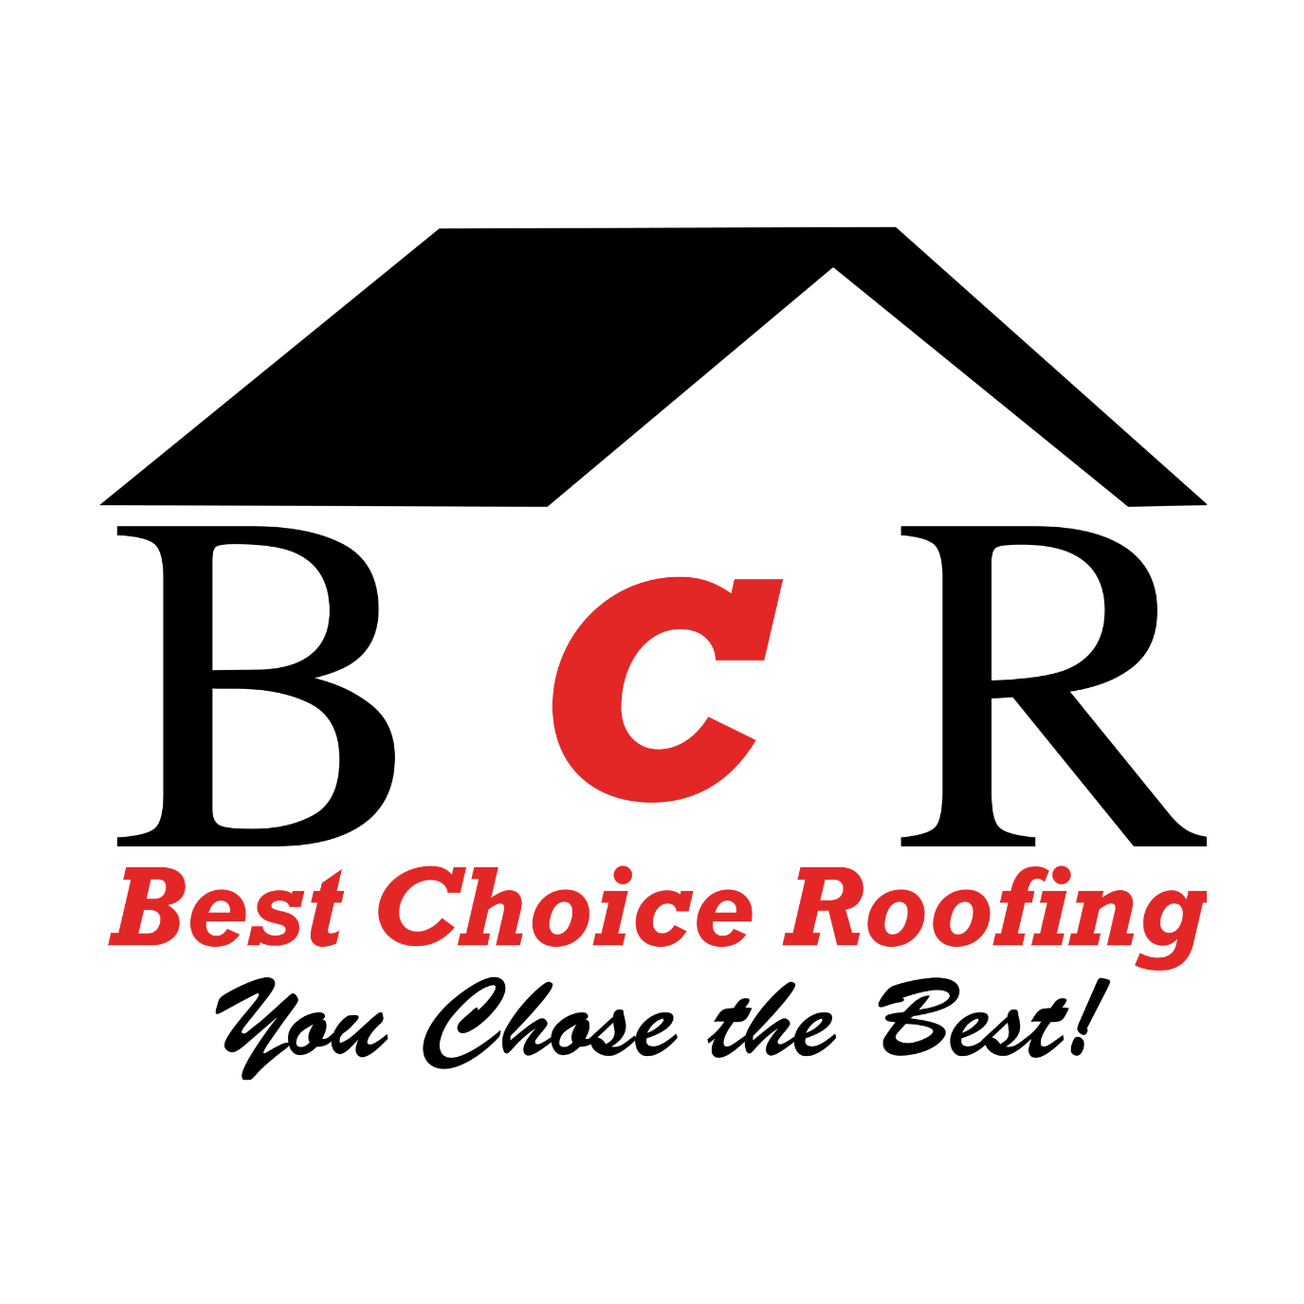 Best Choice Roofing logo